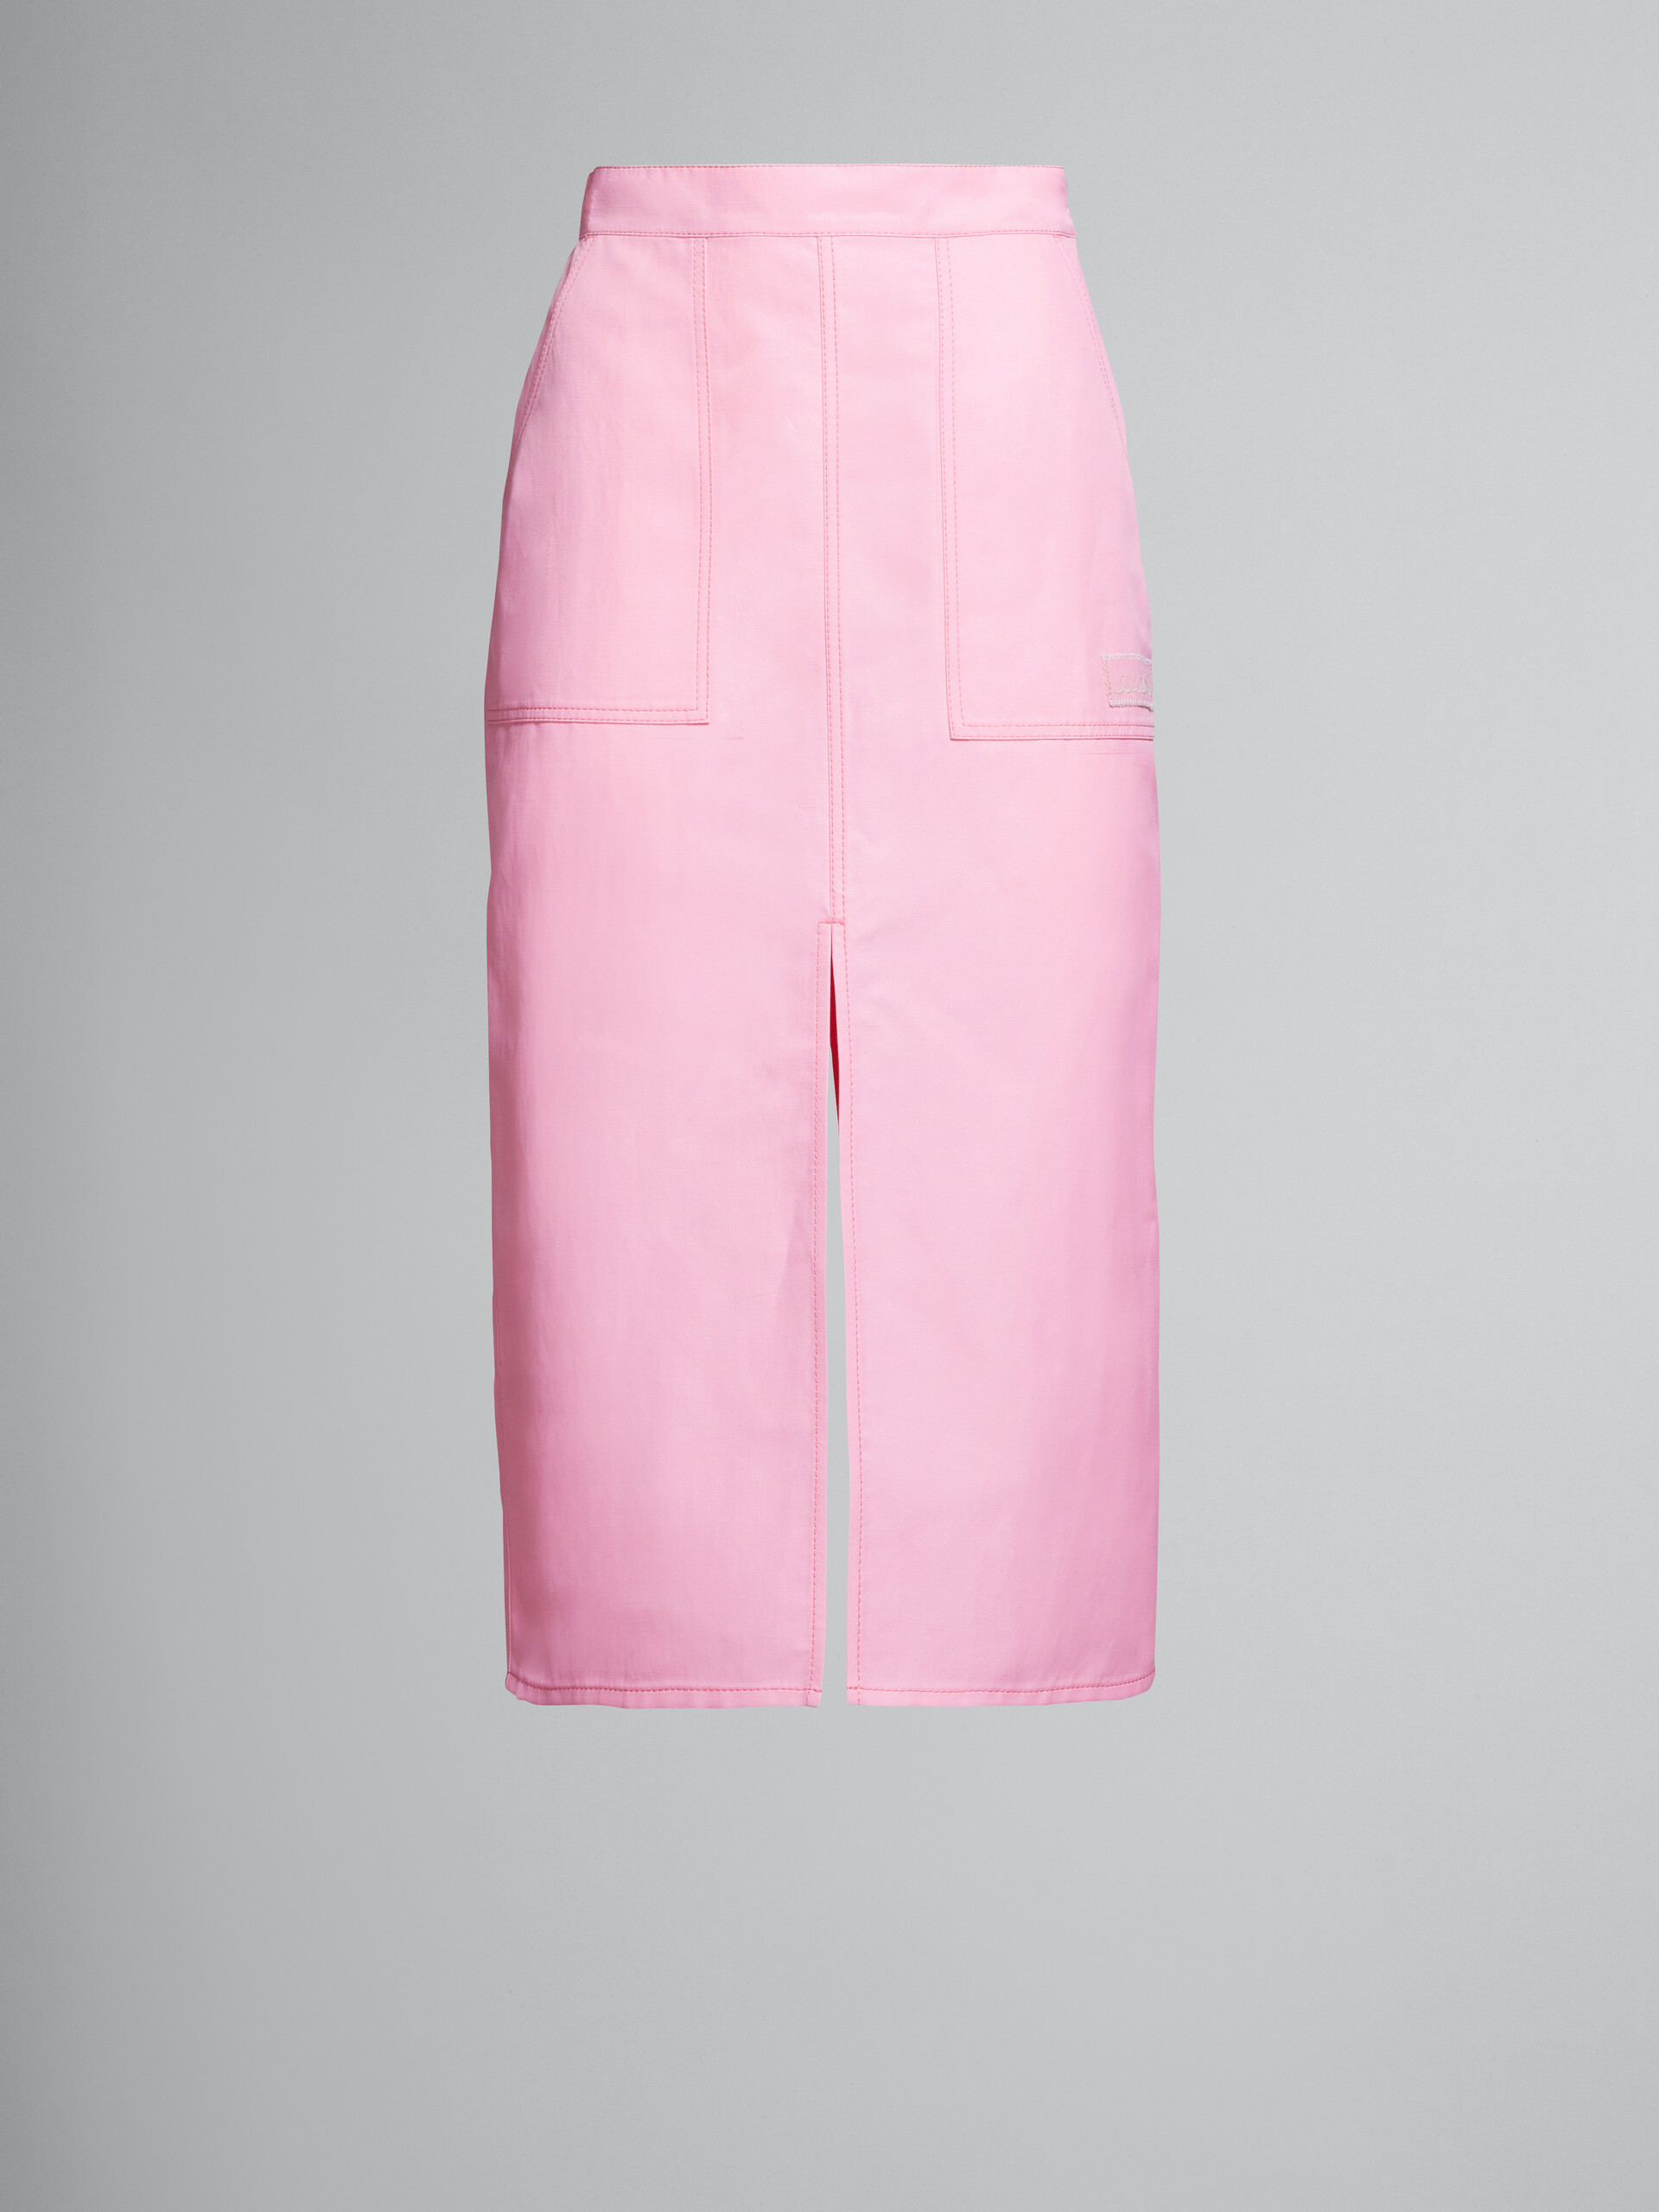 Pink skirt in technical cotton-linen - Skirts - Image 1